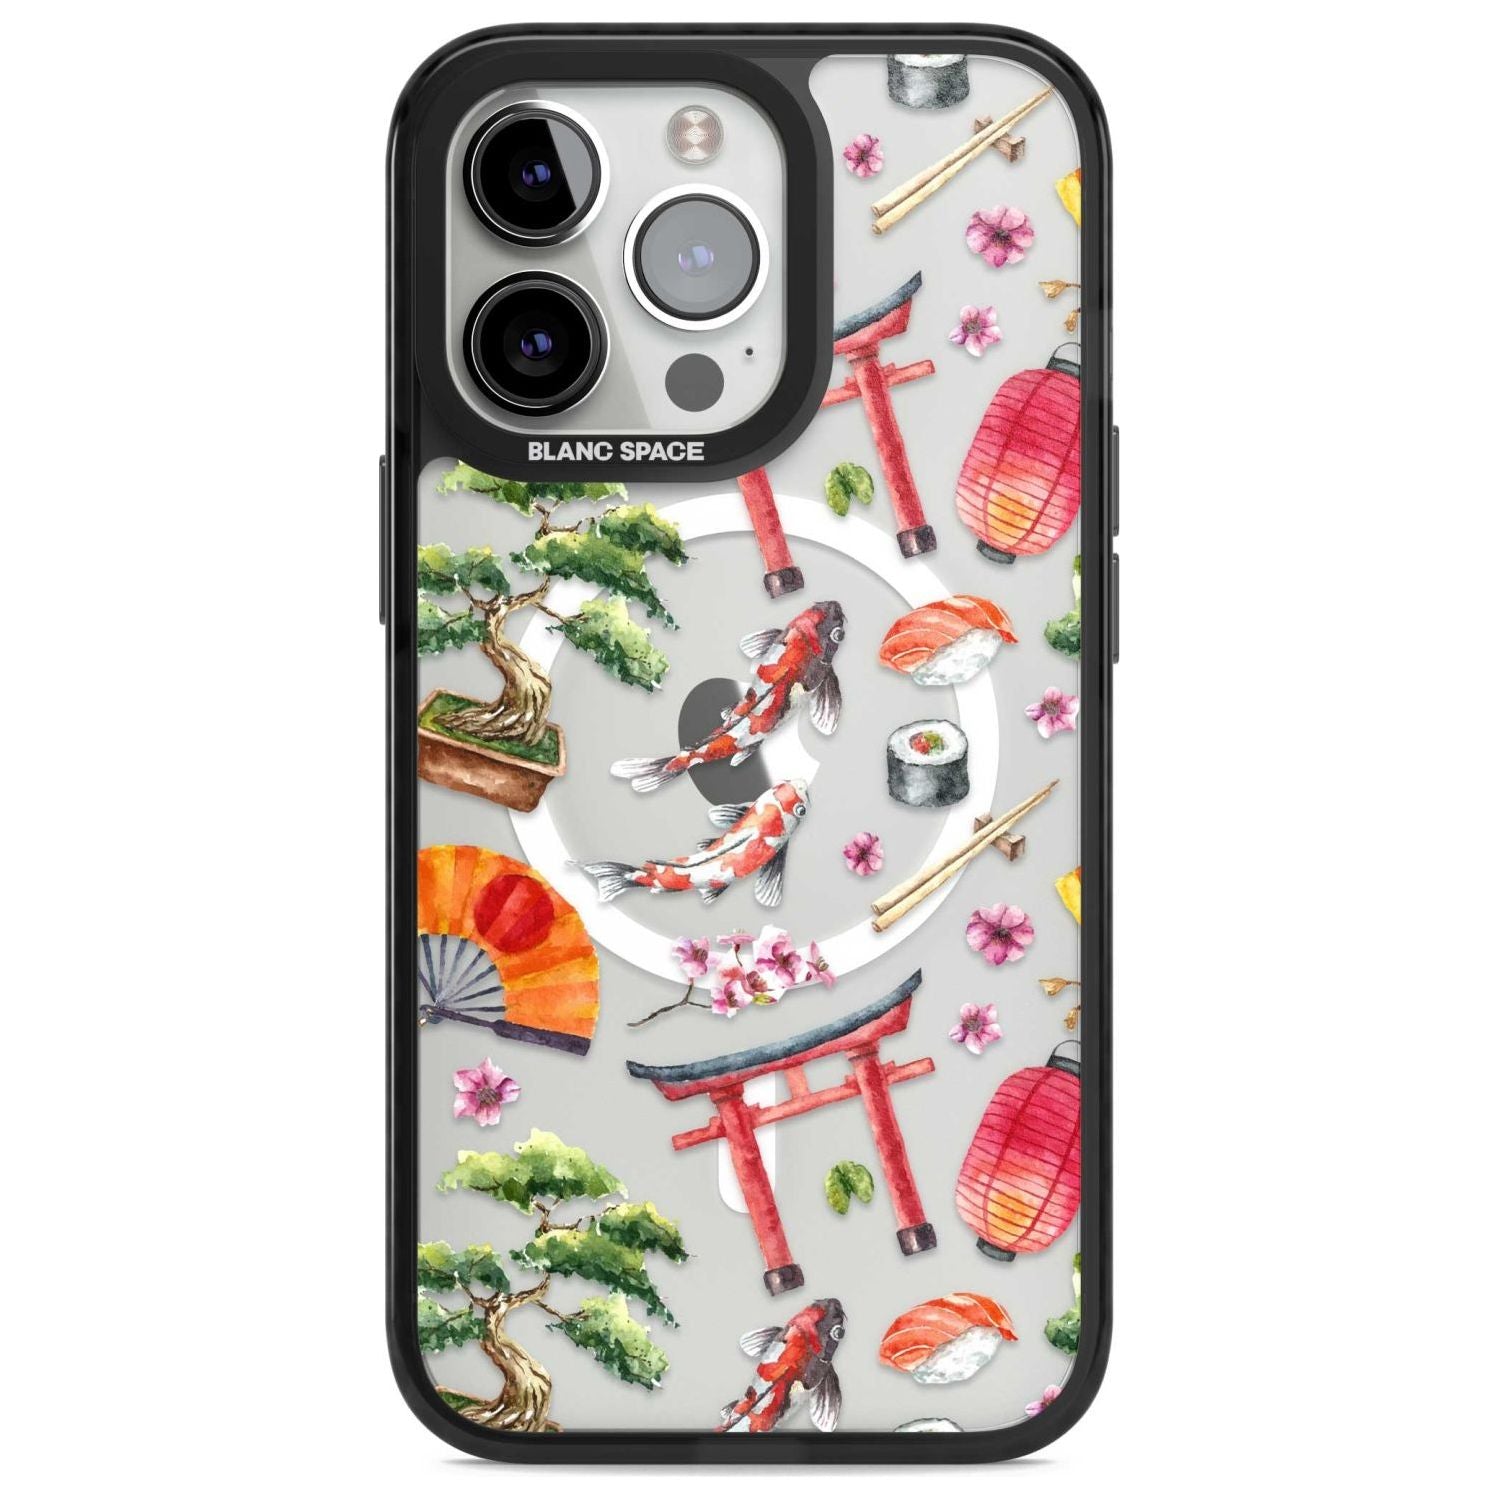 Mixed Japanese Watercolour Pattern Phone Case iPhone 15 Pro Max / Magsafe Black Impact Case,iPhone 15 Pro / Magsafe Black Impact Case,iPhone 14 Pro Max / Magsafe Black Impact Case,iPhone 14 Pro / Magsafe Black Impact Case,iPhone 13 Pro / Magsafe Black Impact Case Blanc Space